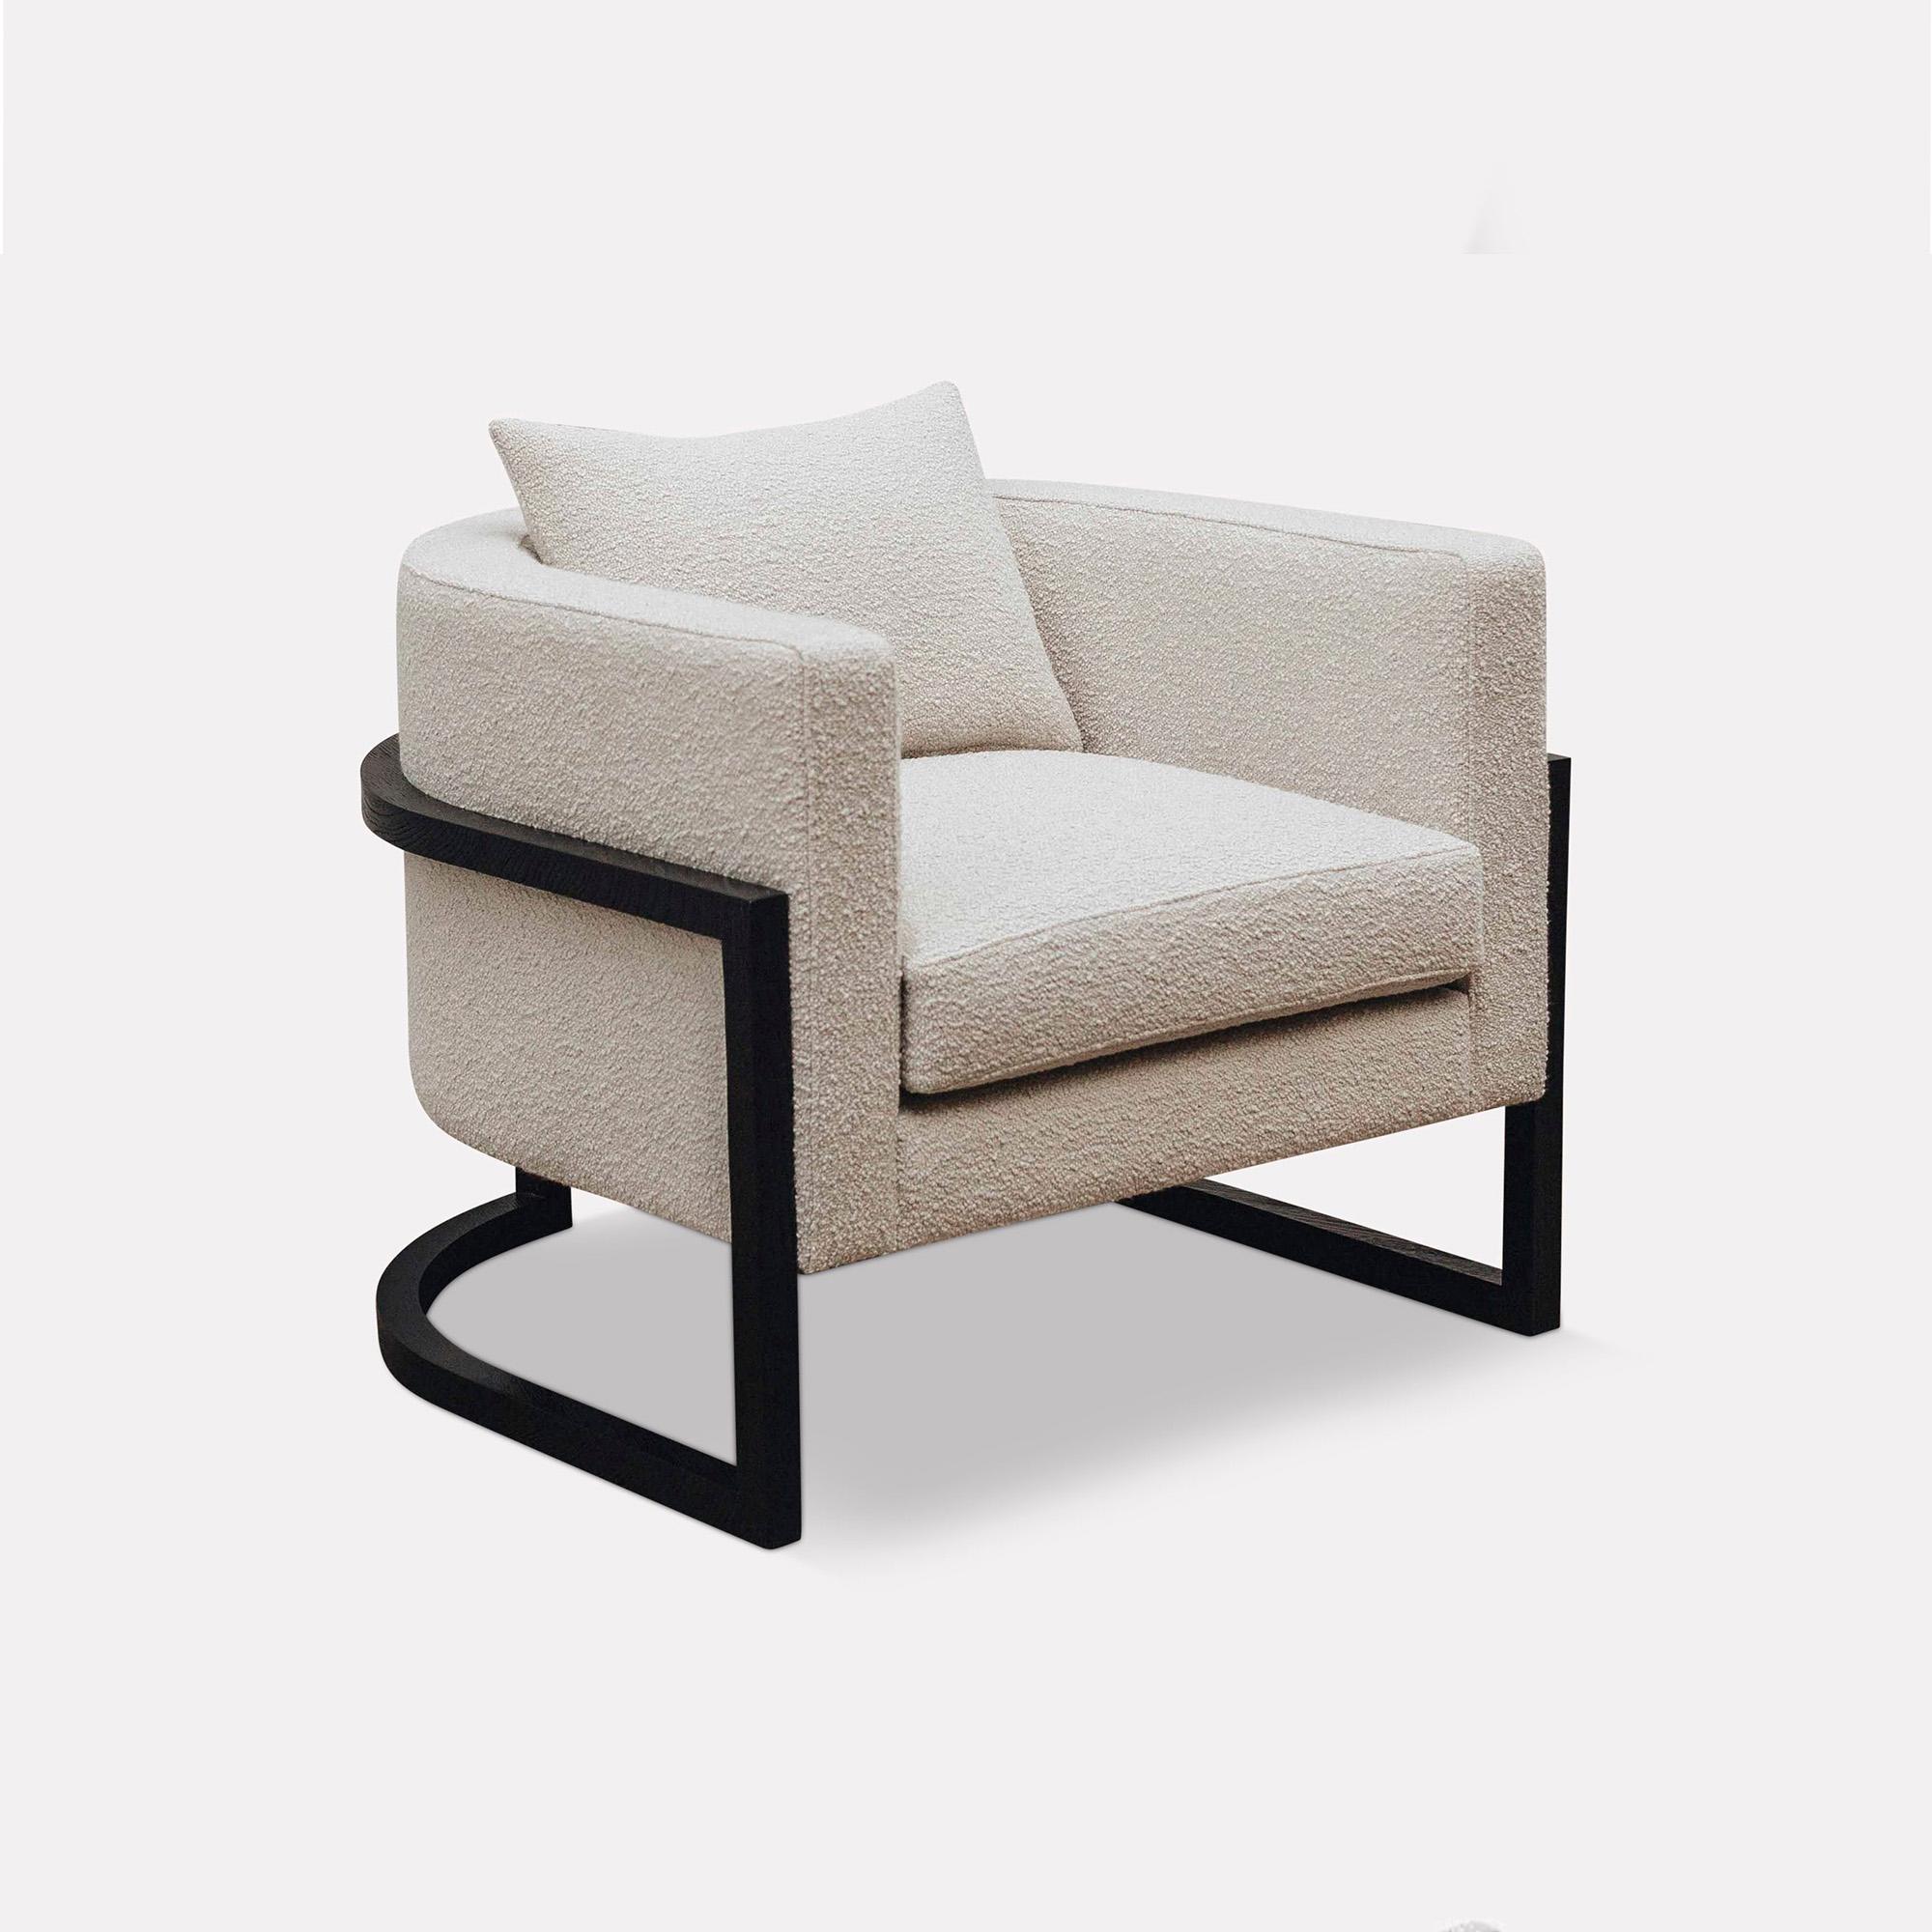 Wood Julius Armchair by Duistt
Dimensions: W 86 x D 84 x H 70 cm
Materials: Duistt Fabric, Darkened Oak
Notes: One back cushion included

The JULIUS wood armchair, crafted with great attention to detail, features clean and modern lines always with a